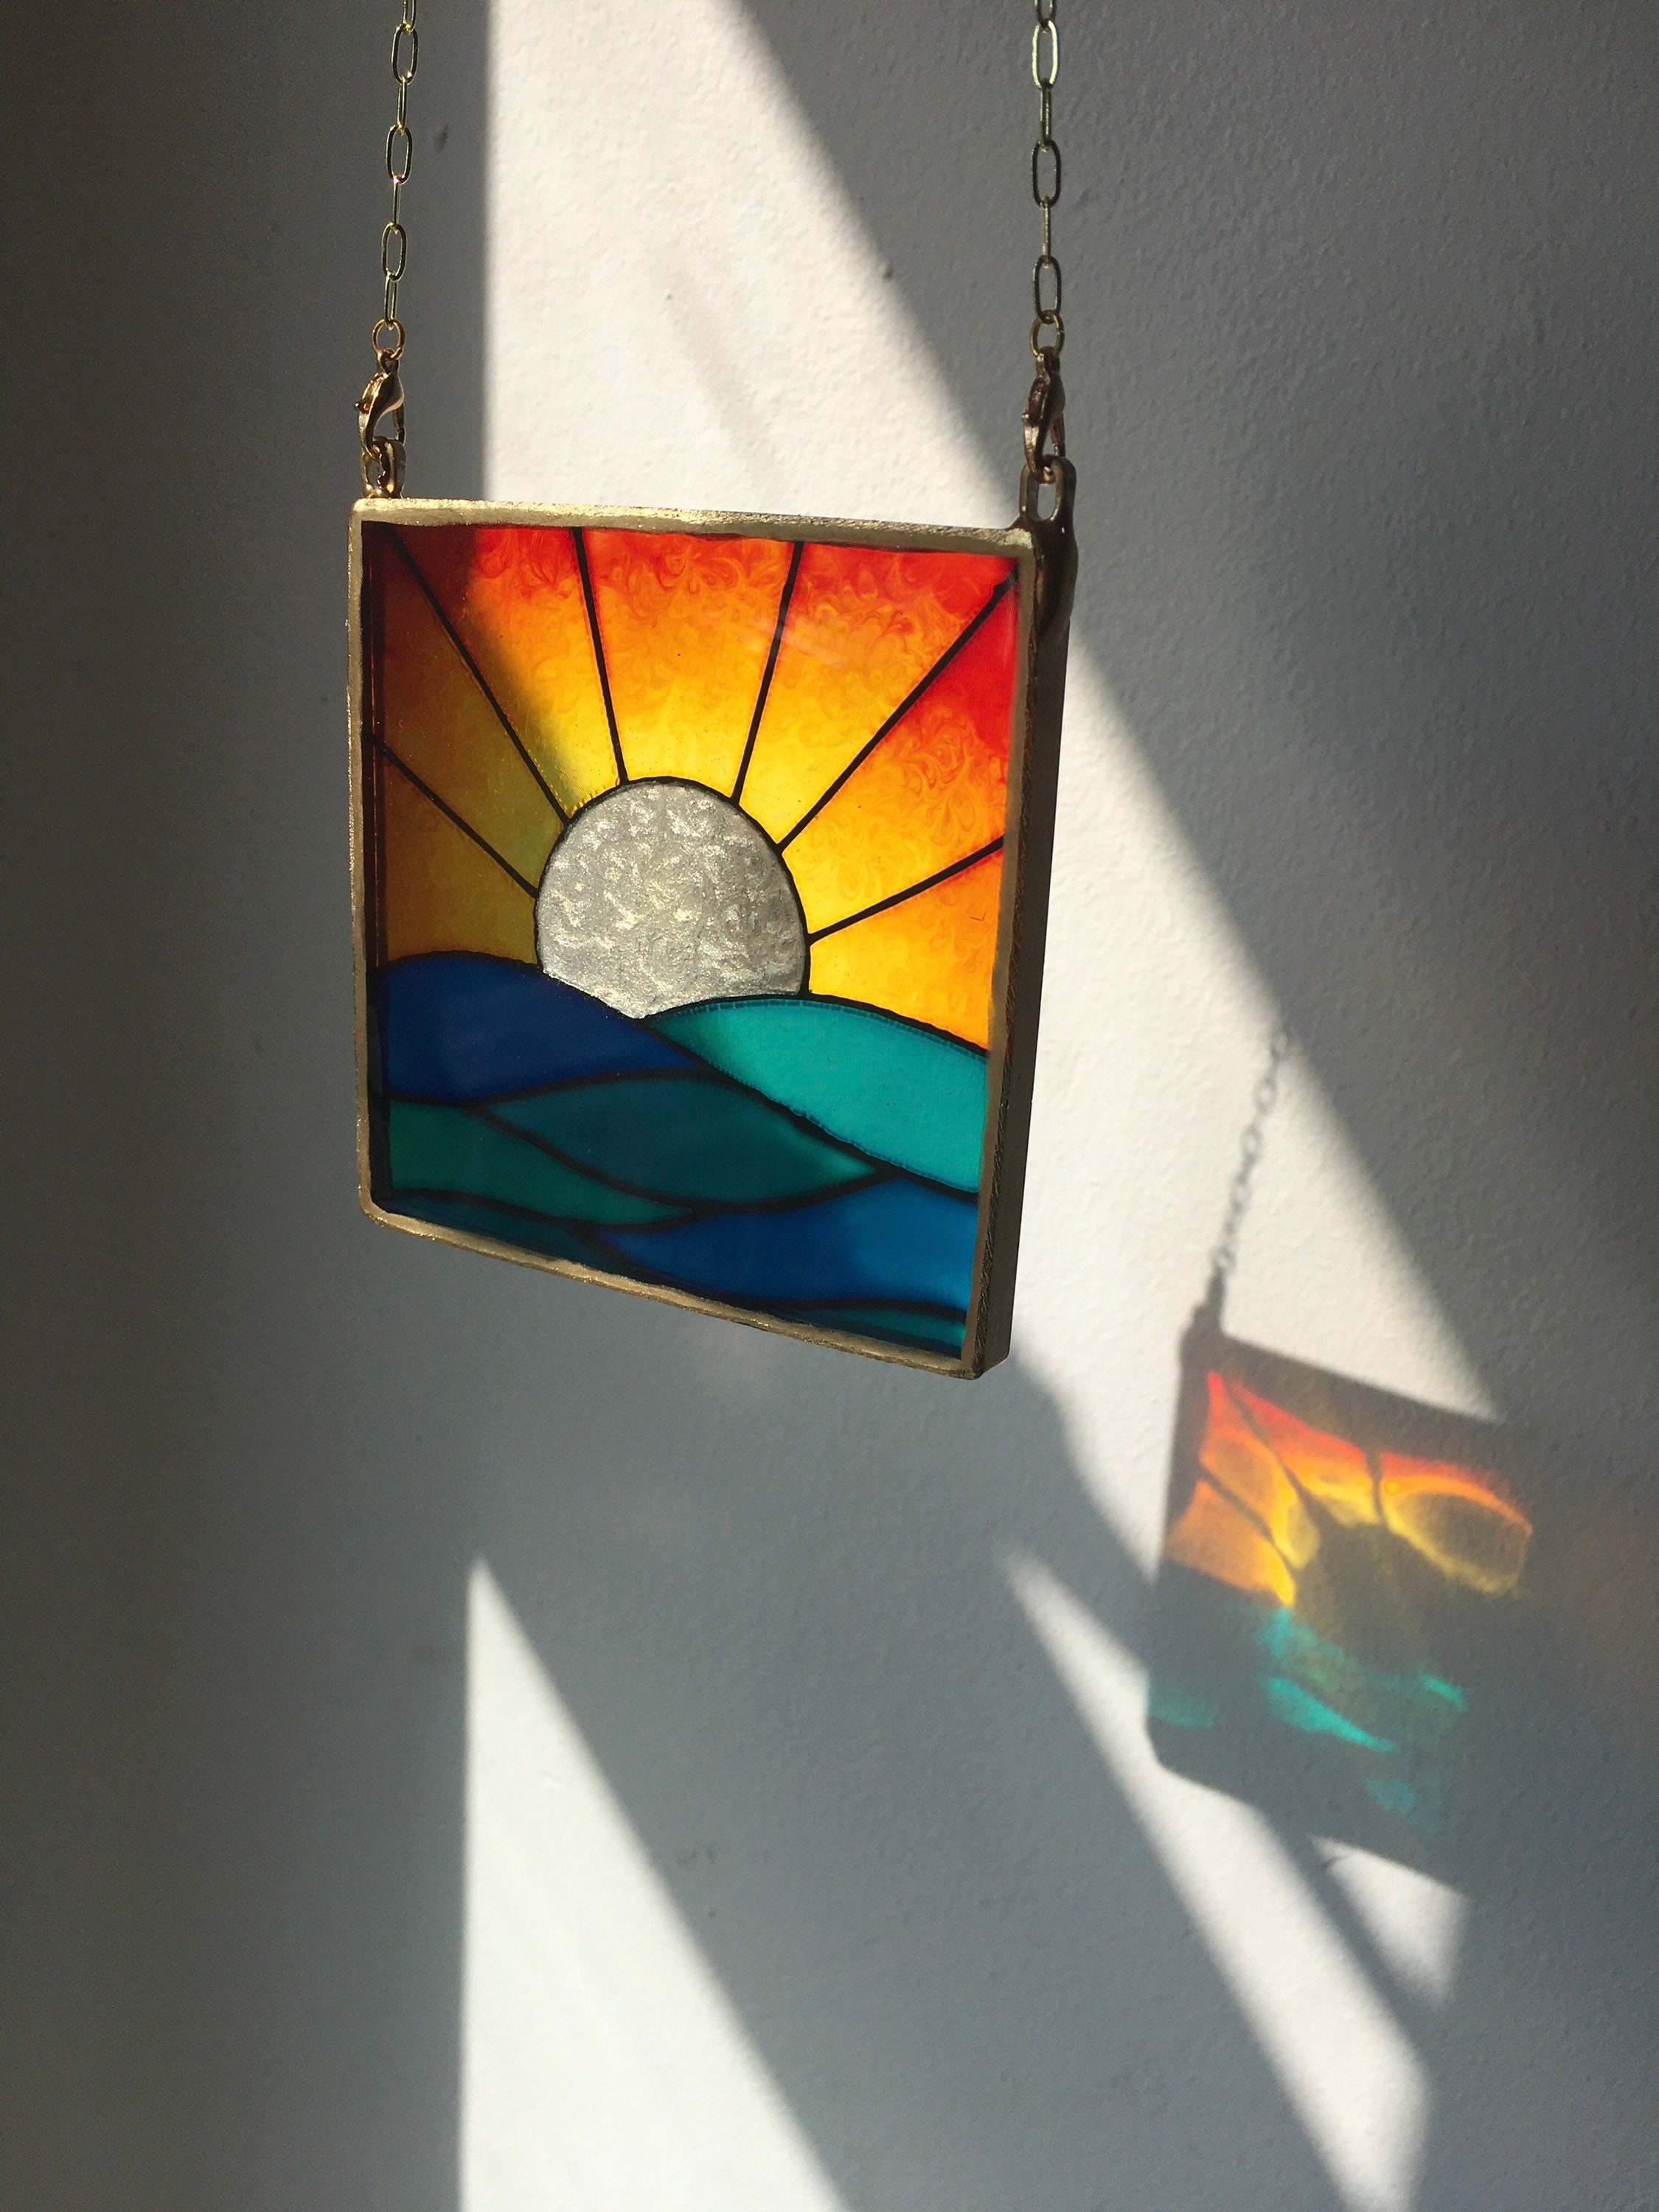 Resin Stained glass effect tutorial, Holographic Resin art